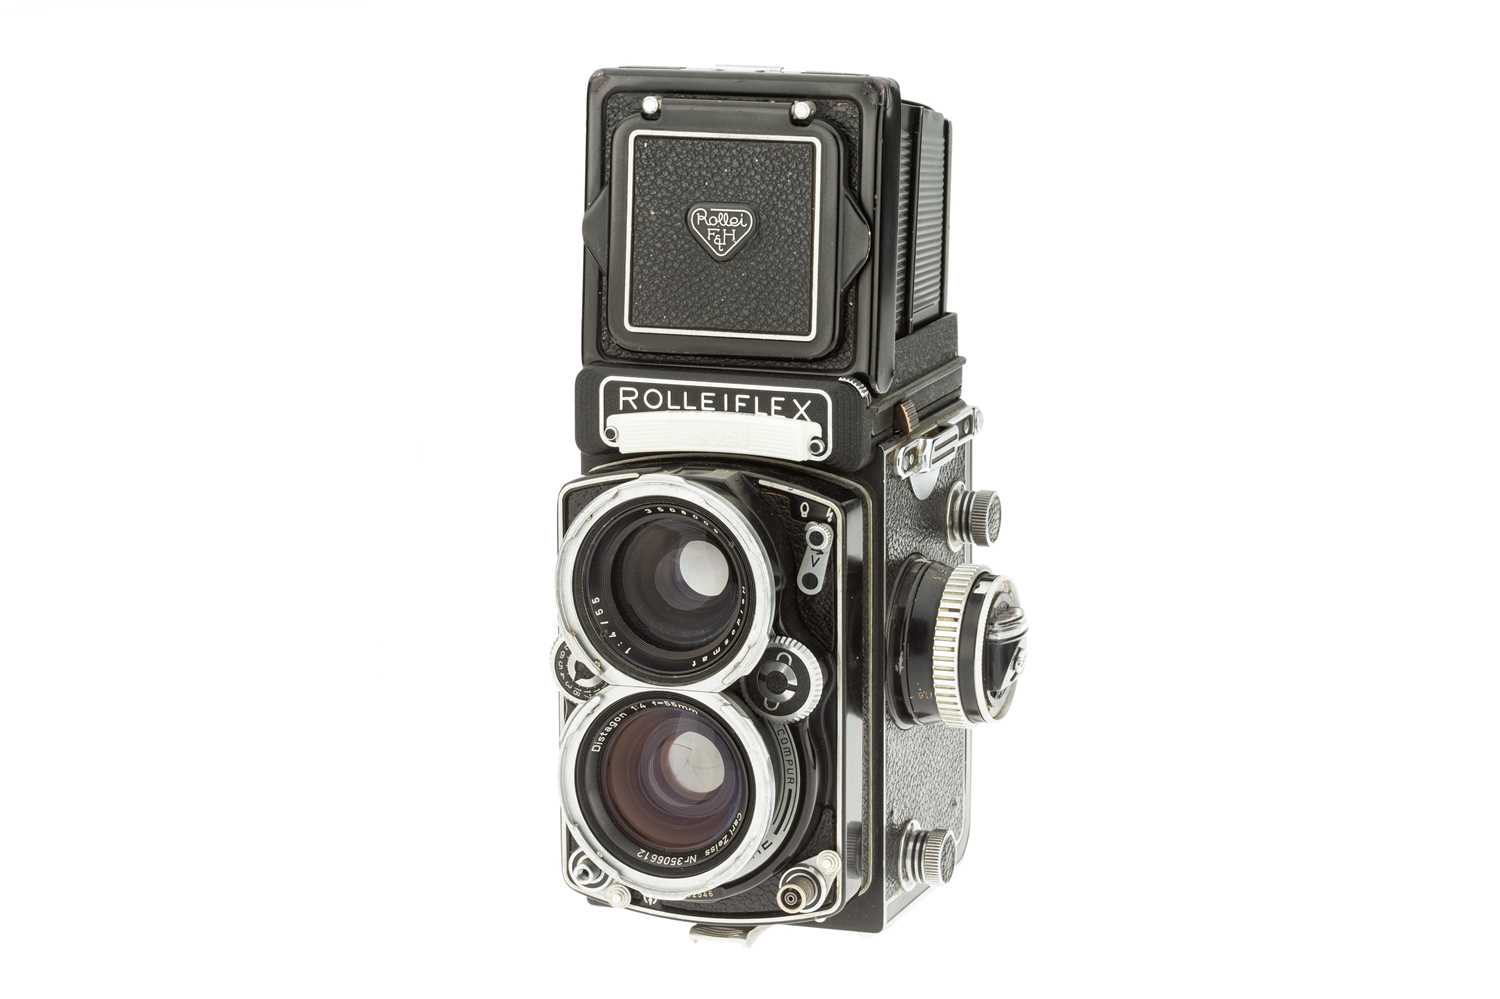 Lot 131 - A Rollei Wide-Angle Rolleiflex TLR Medium